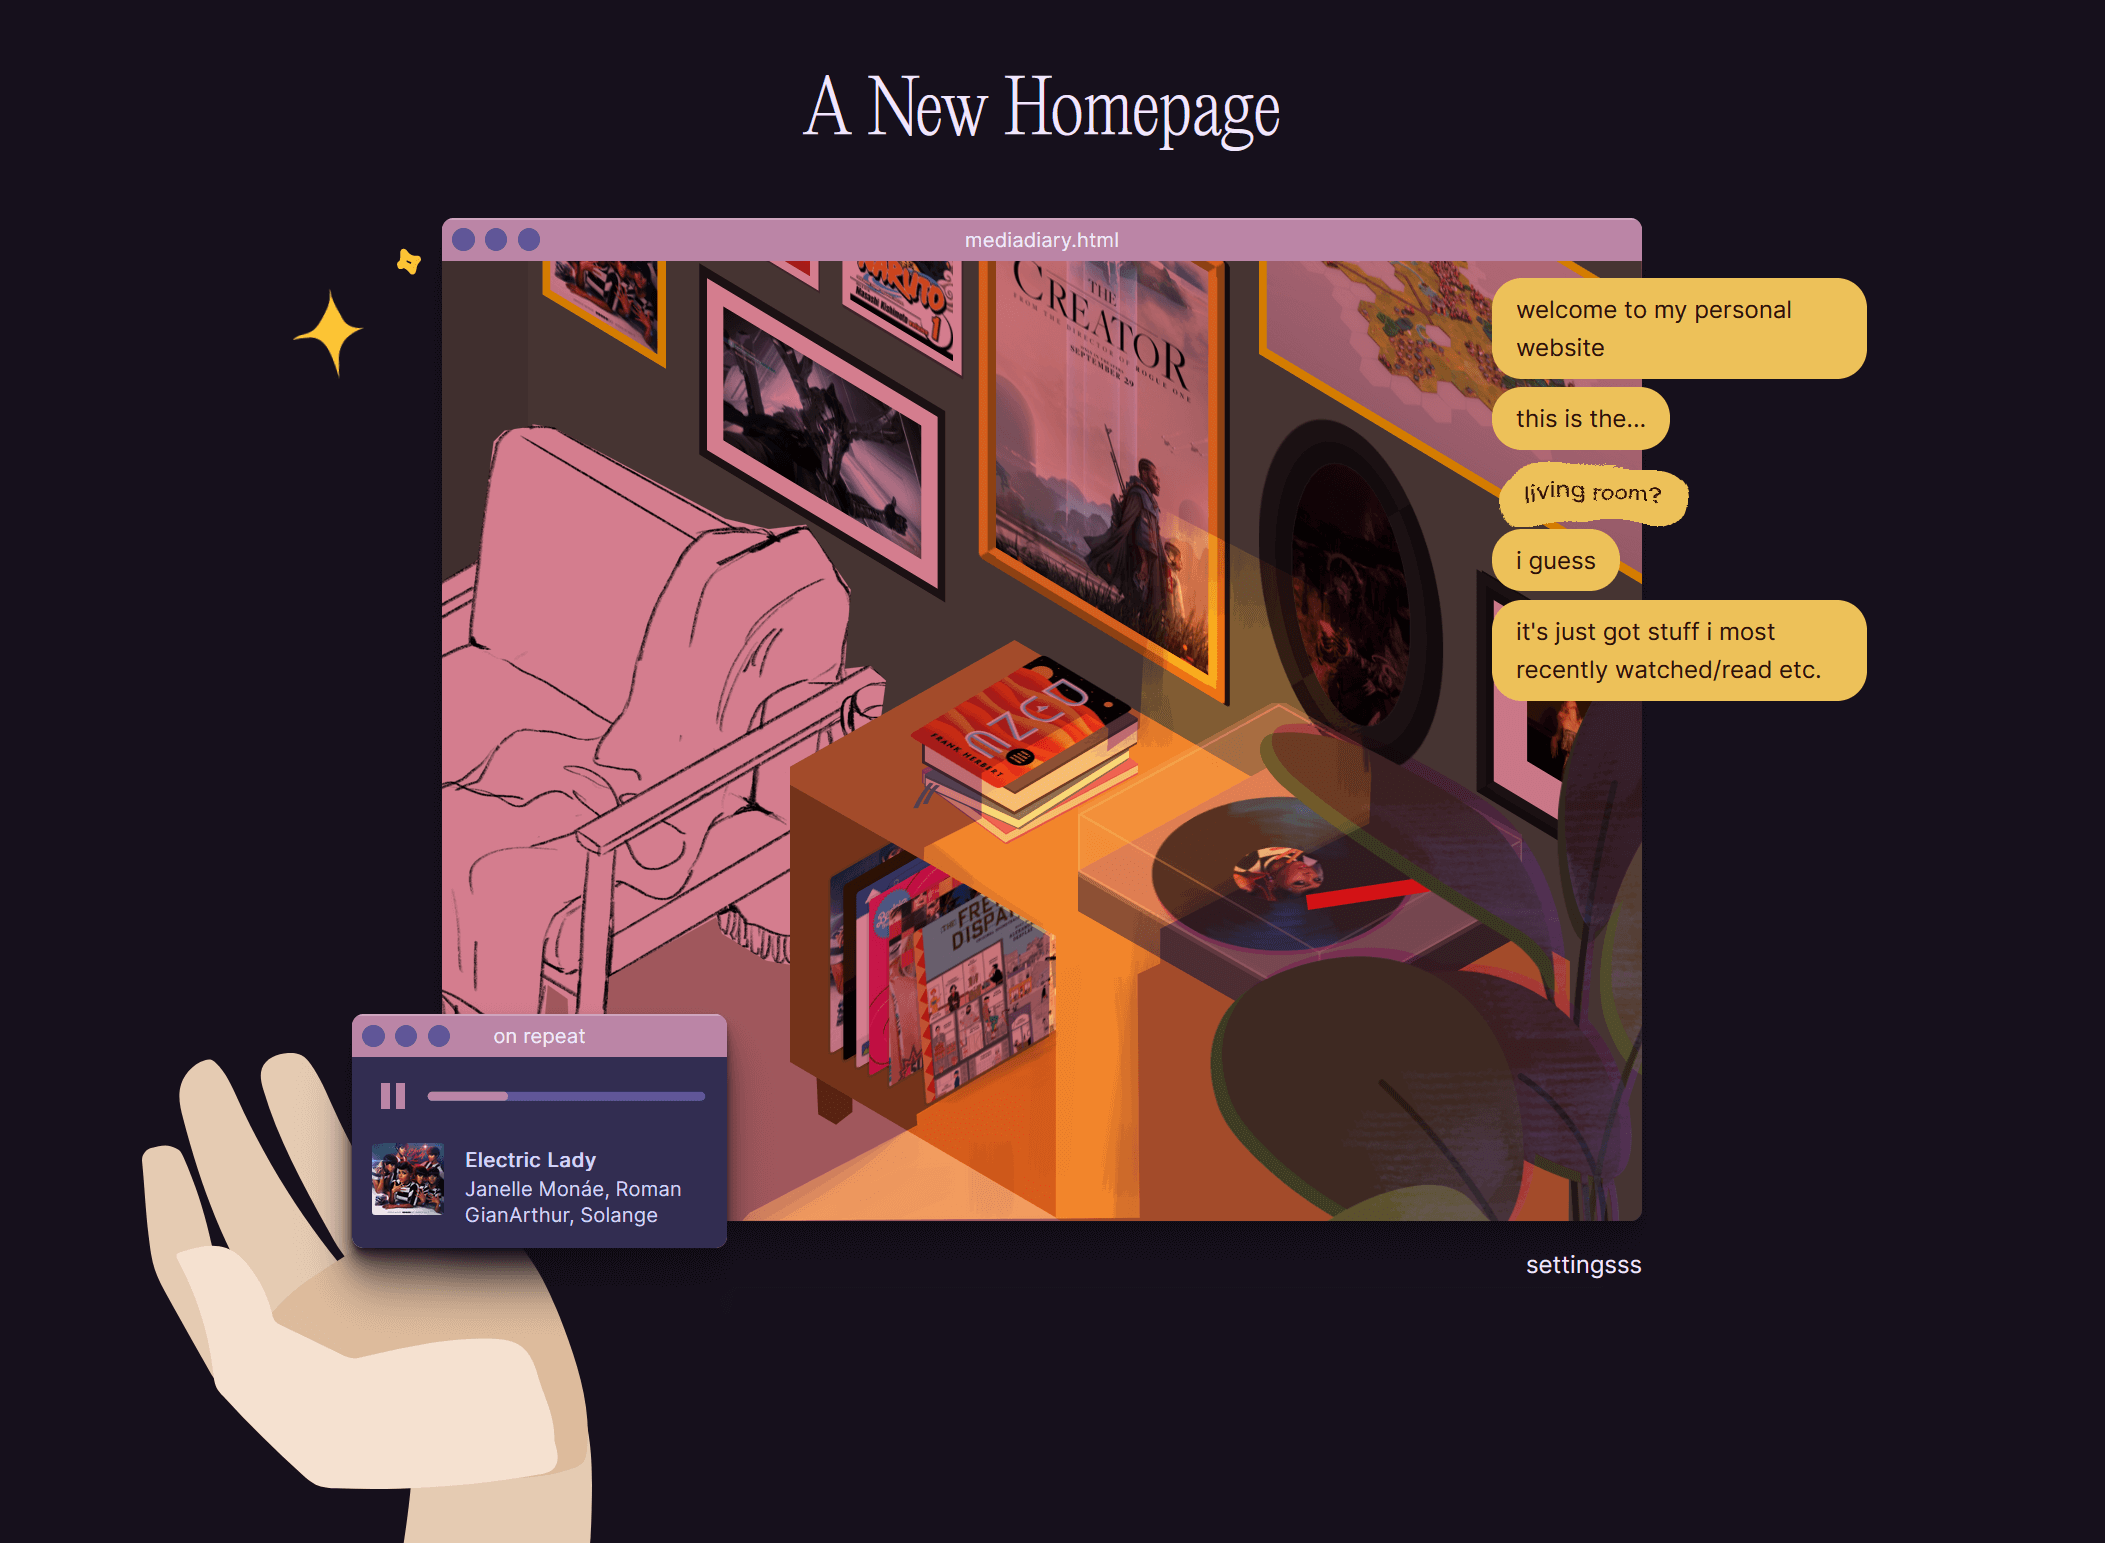 A drawing of a room with a chair, media console, and a gallery wall of framed images. Images of movie posters, game screenshots, books, and album covers are interspersed throughout the drawing, such as in photo frames. The whole drawing is framed as a software window, with popups on top highlighting a song as well as chat bubbles introducing the page.